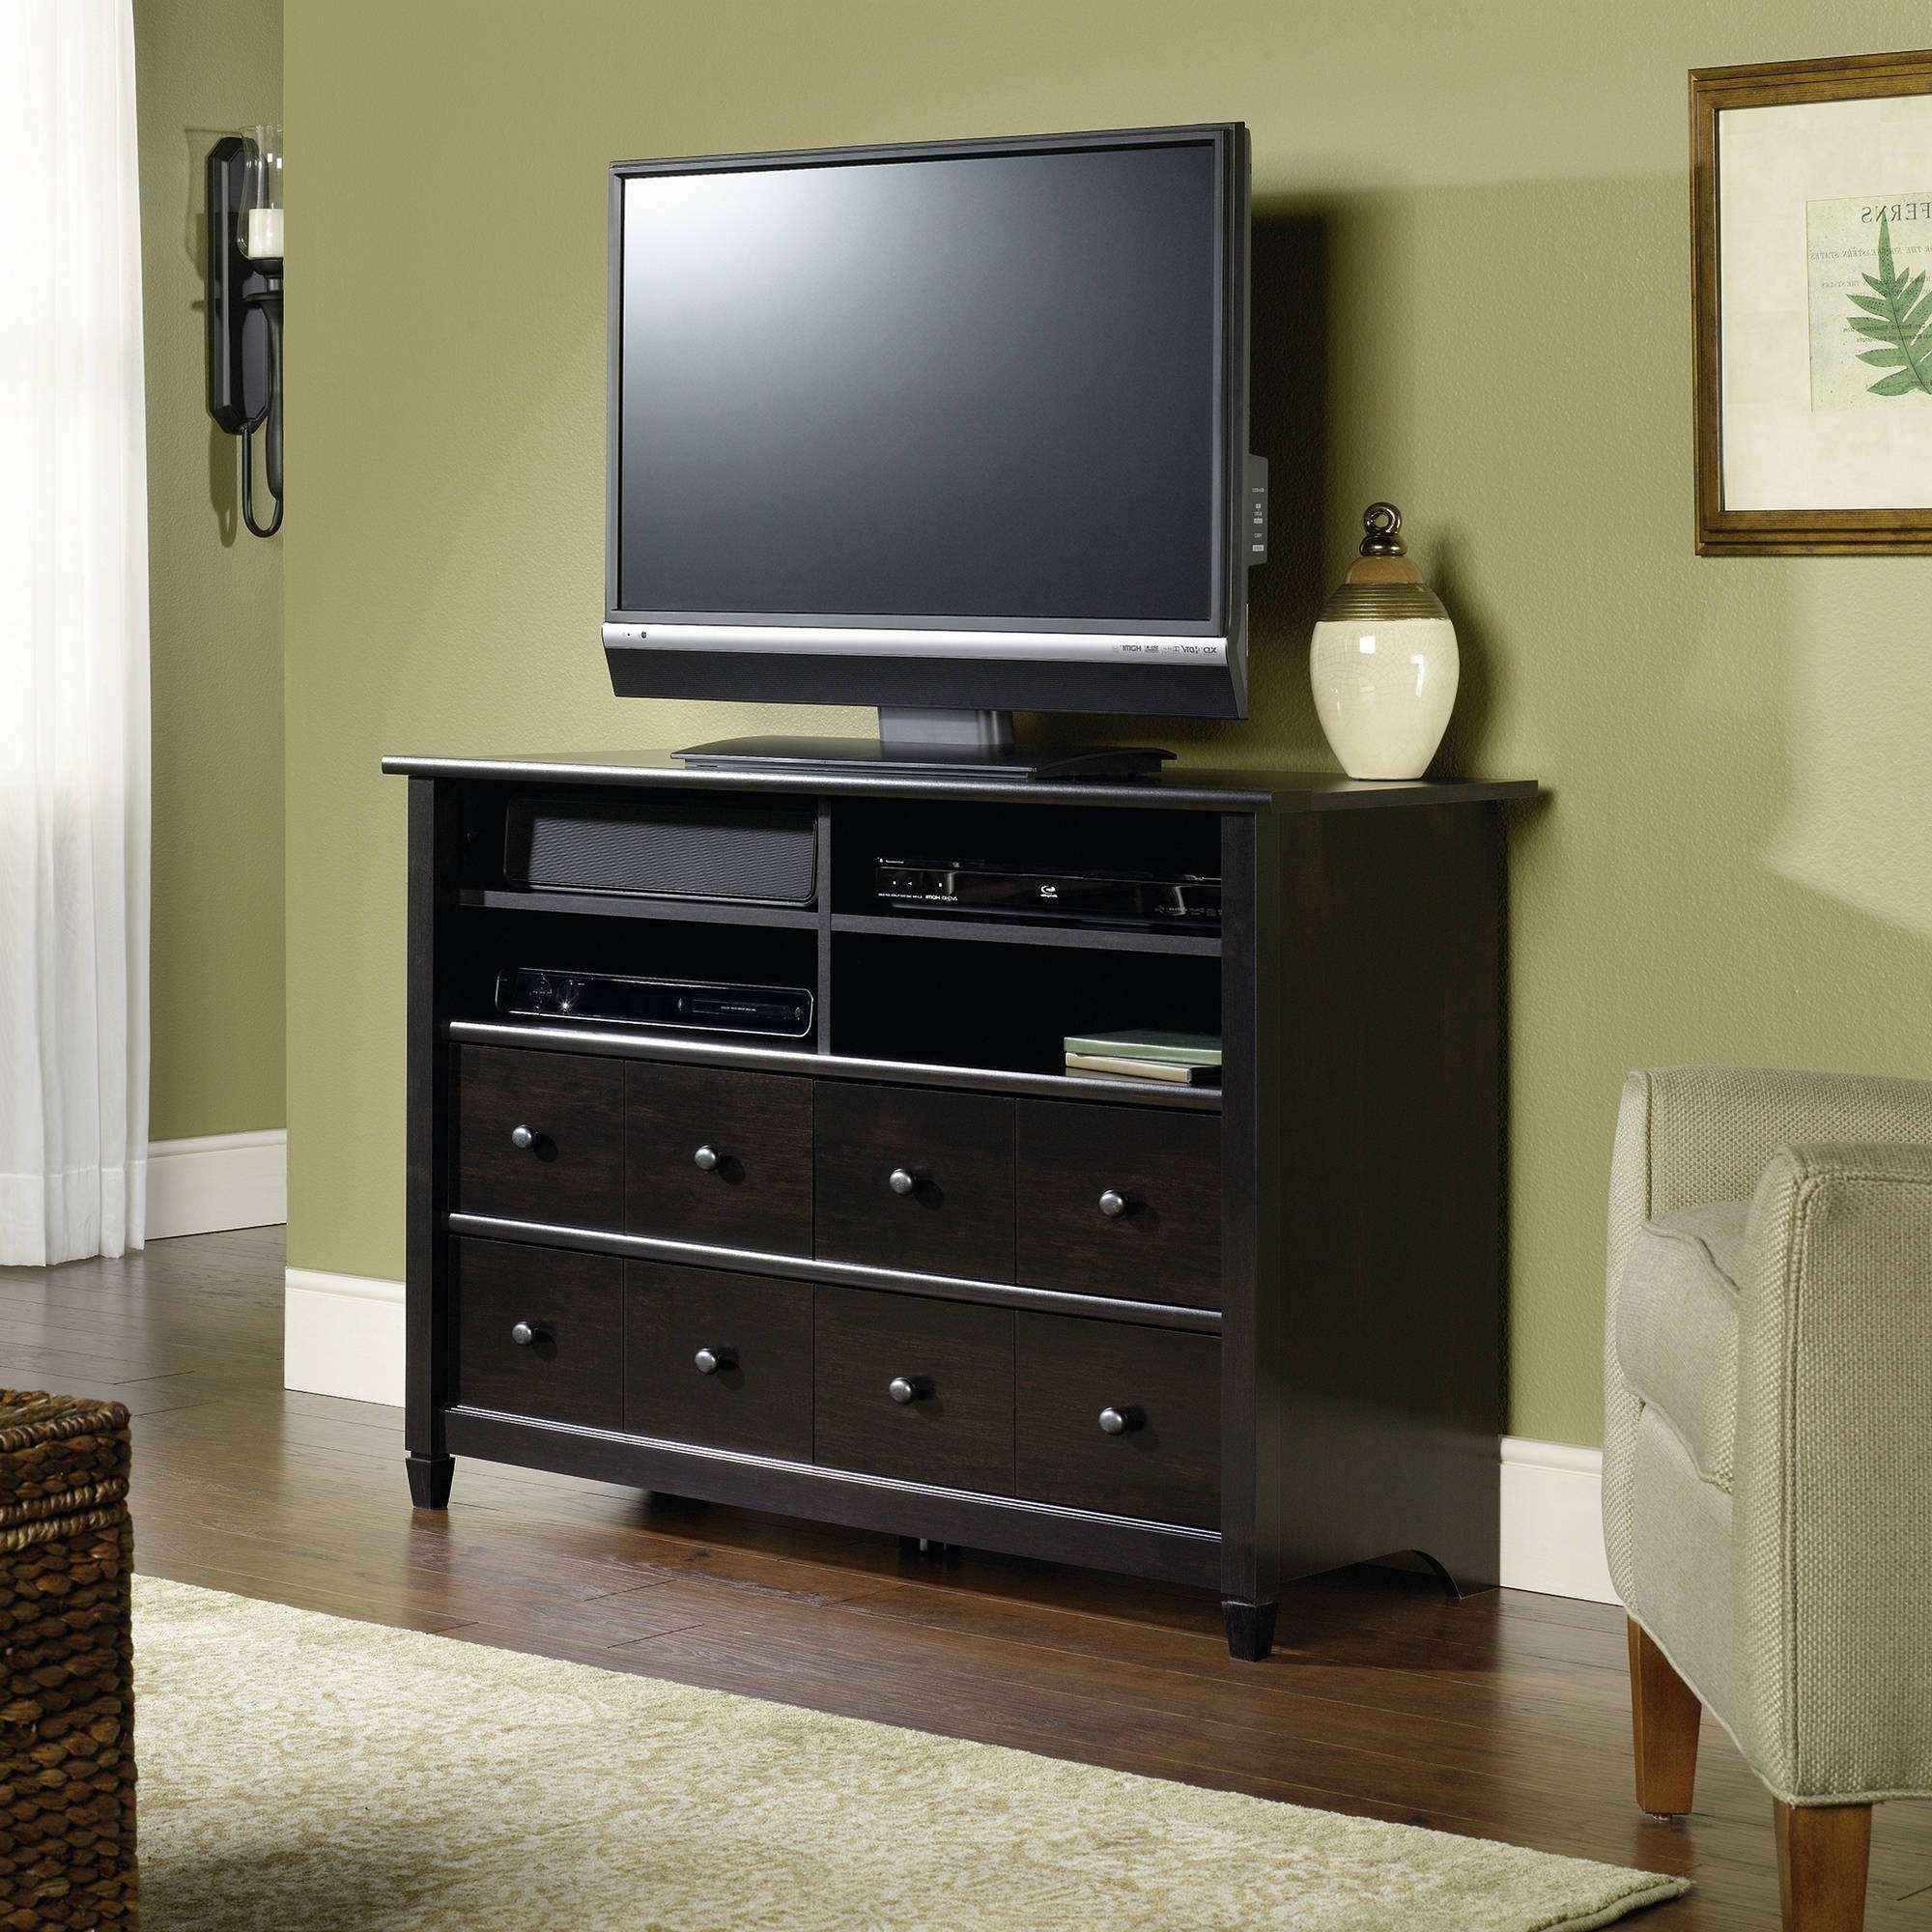 Sauder Edge Water Tall Tv Stand For Tvs Up To 45", Estate Black For Tall Black Tv Cabinets (View 1 of 20)